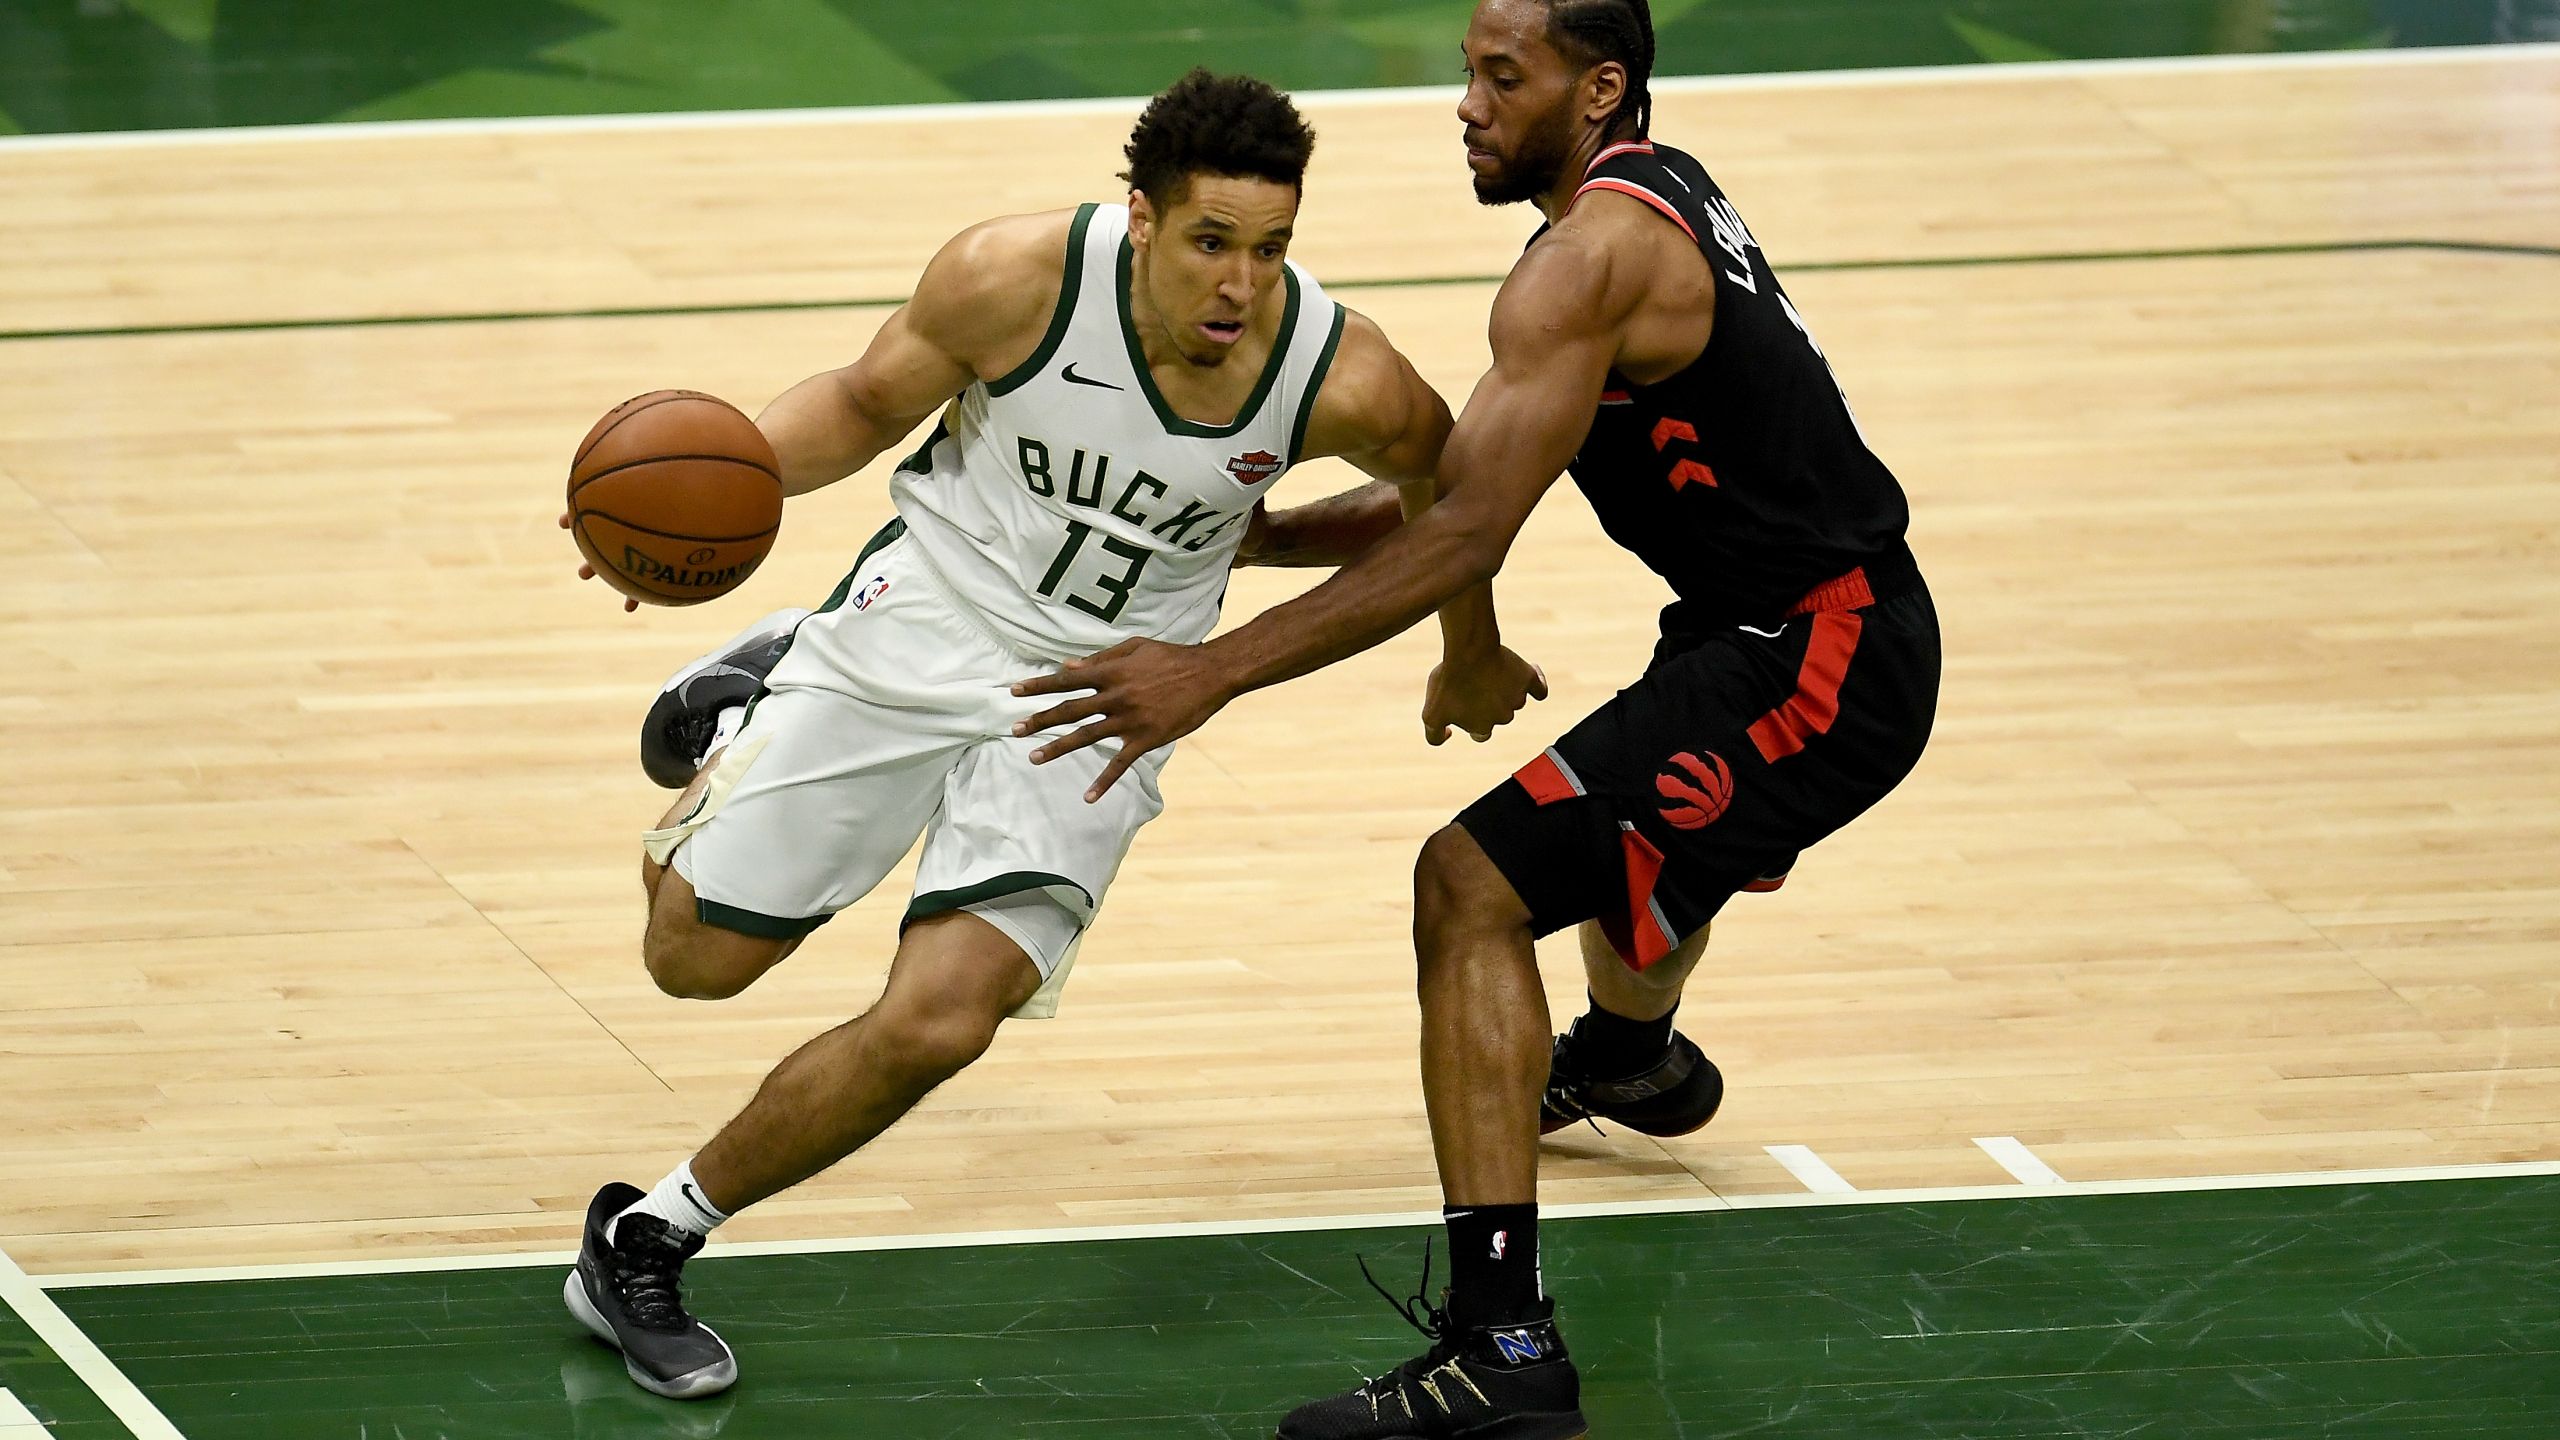 Reports indicate Pacers will sign Malcolm Brogdon, Jeremy Lamb